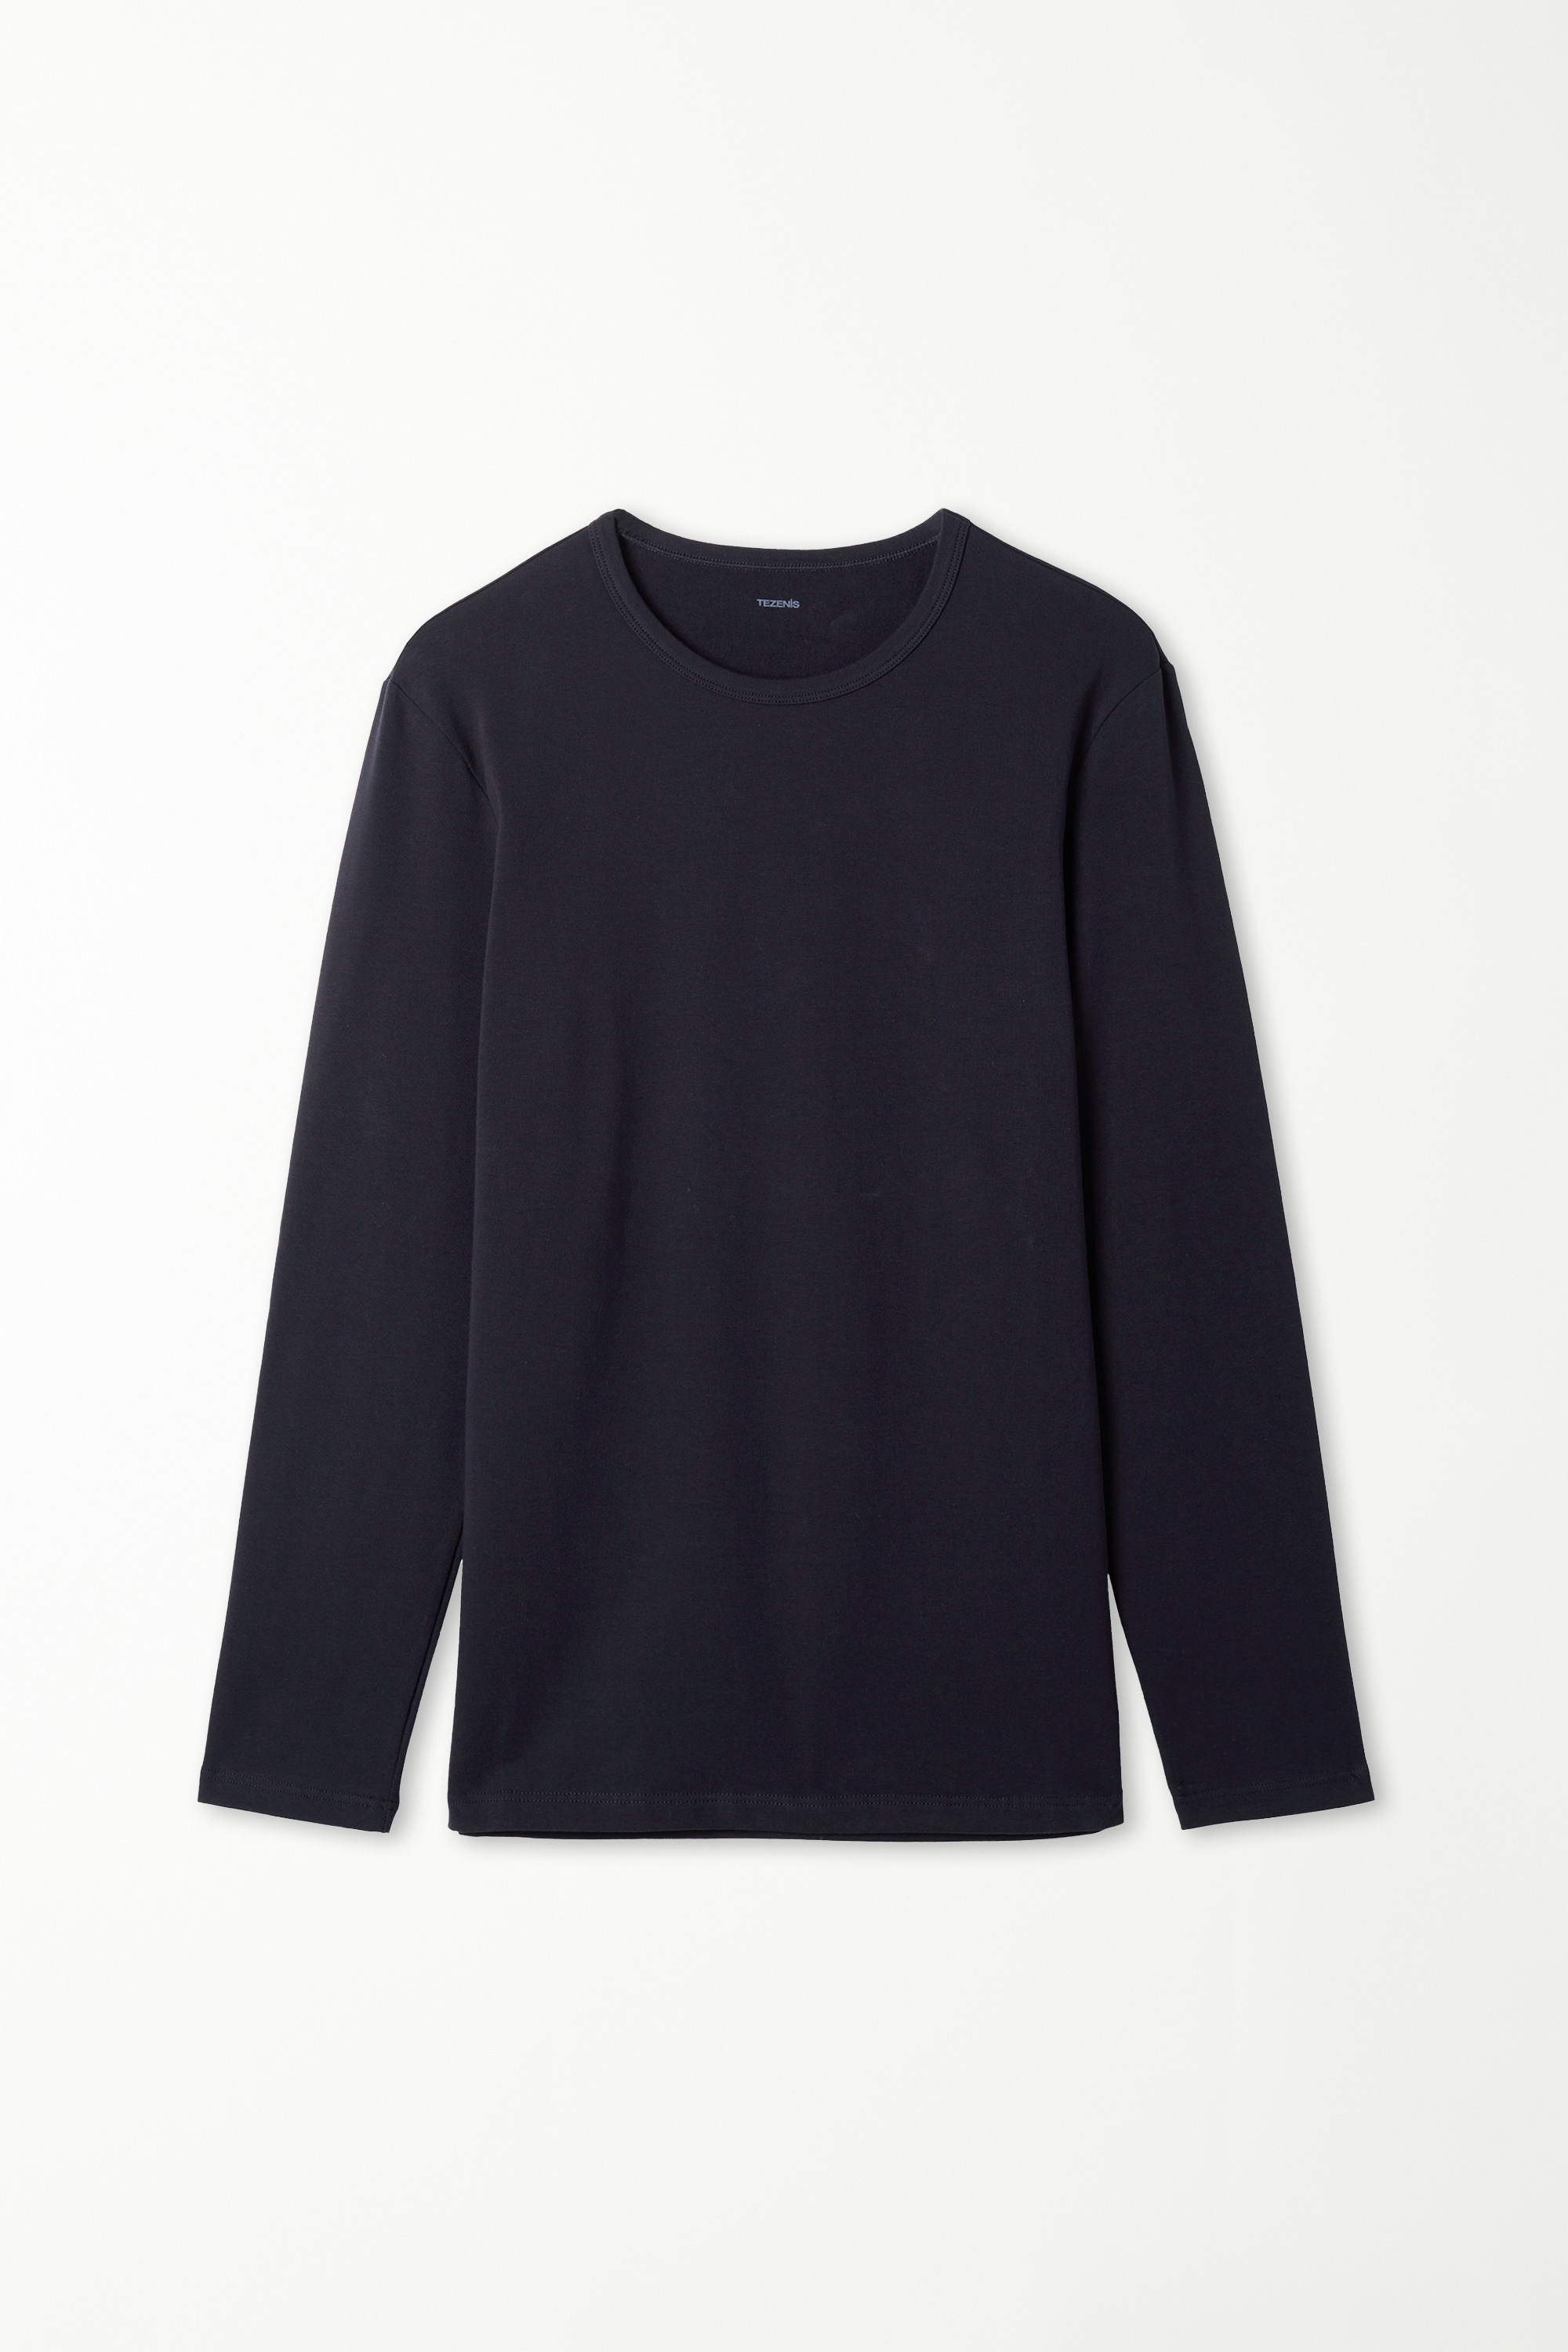 Long-Sleeve Round-Neck Thermal Cotton Top